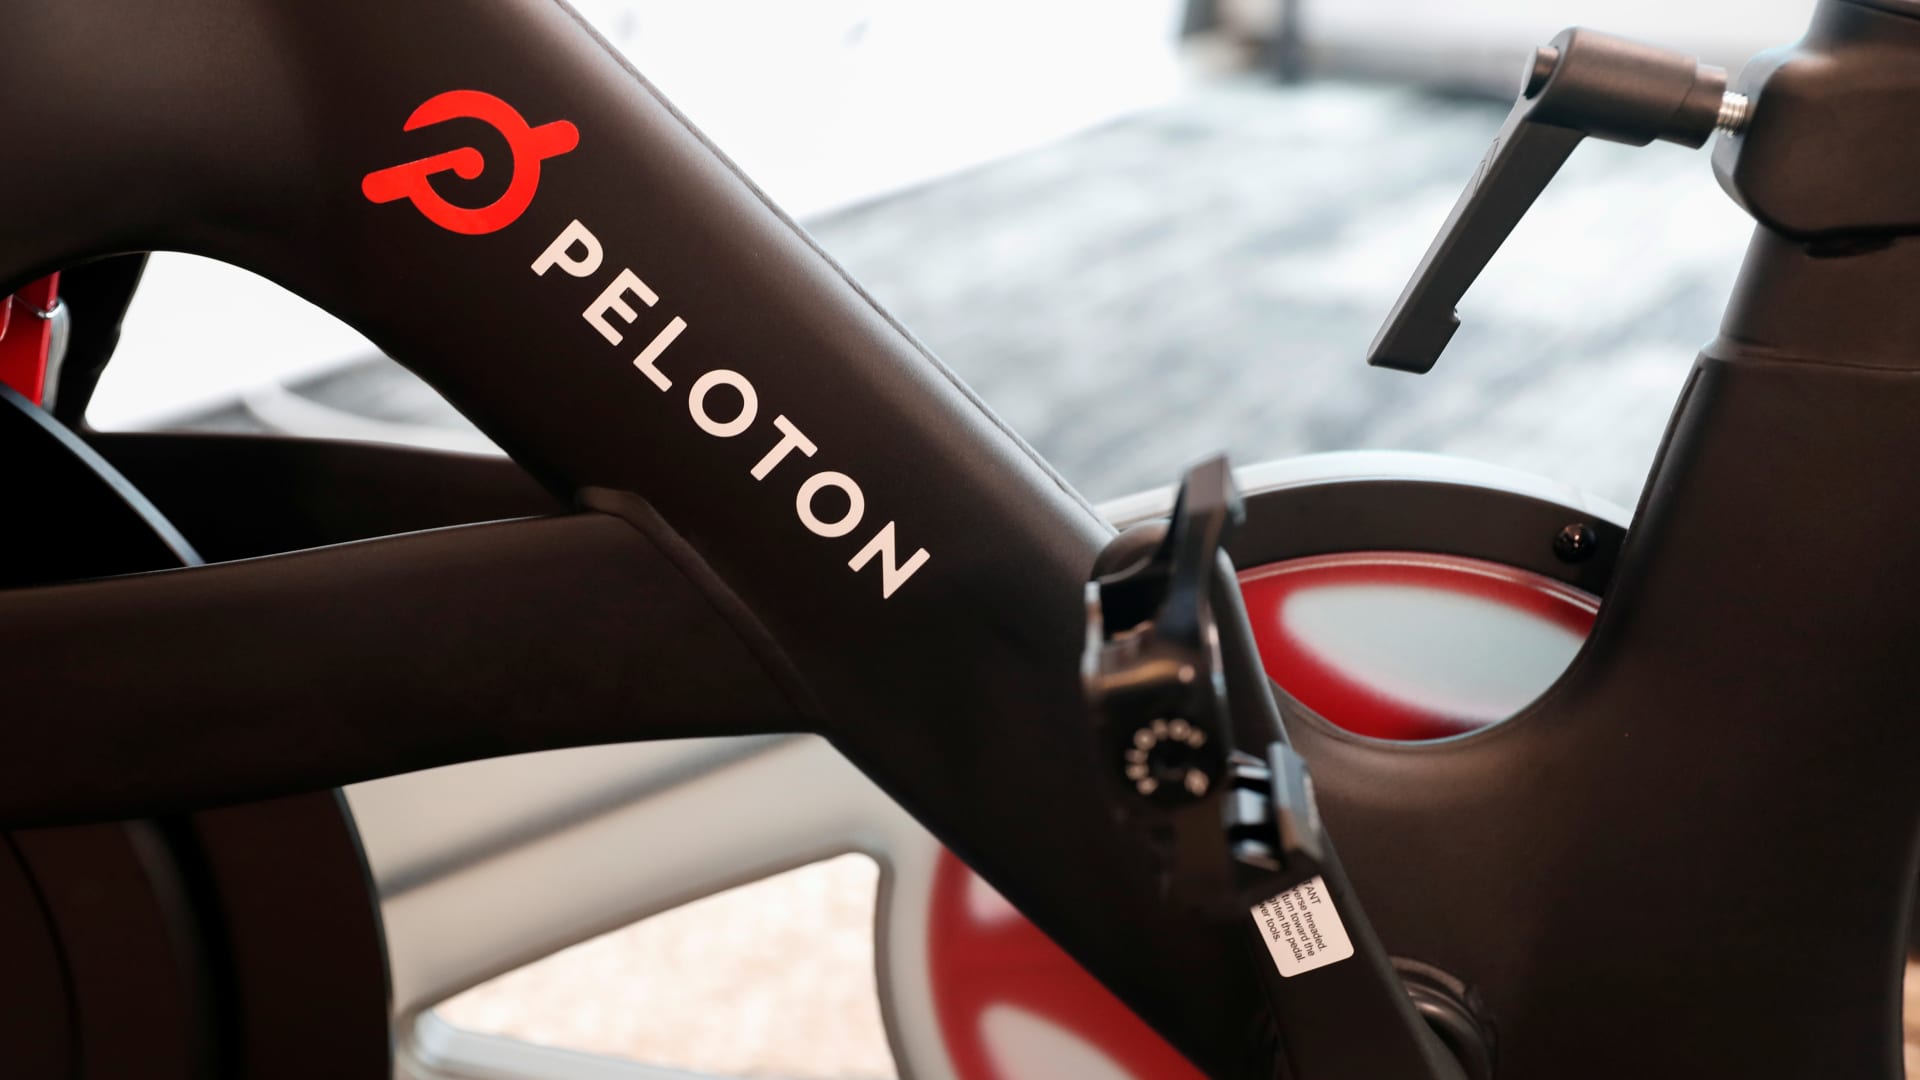 Peloton, Under Armour, Monster Beverage and more